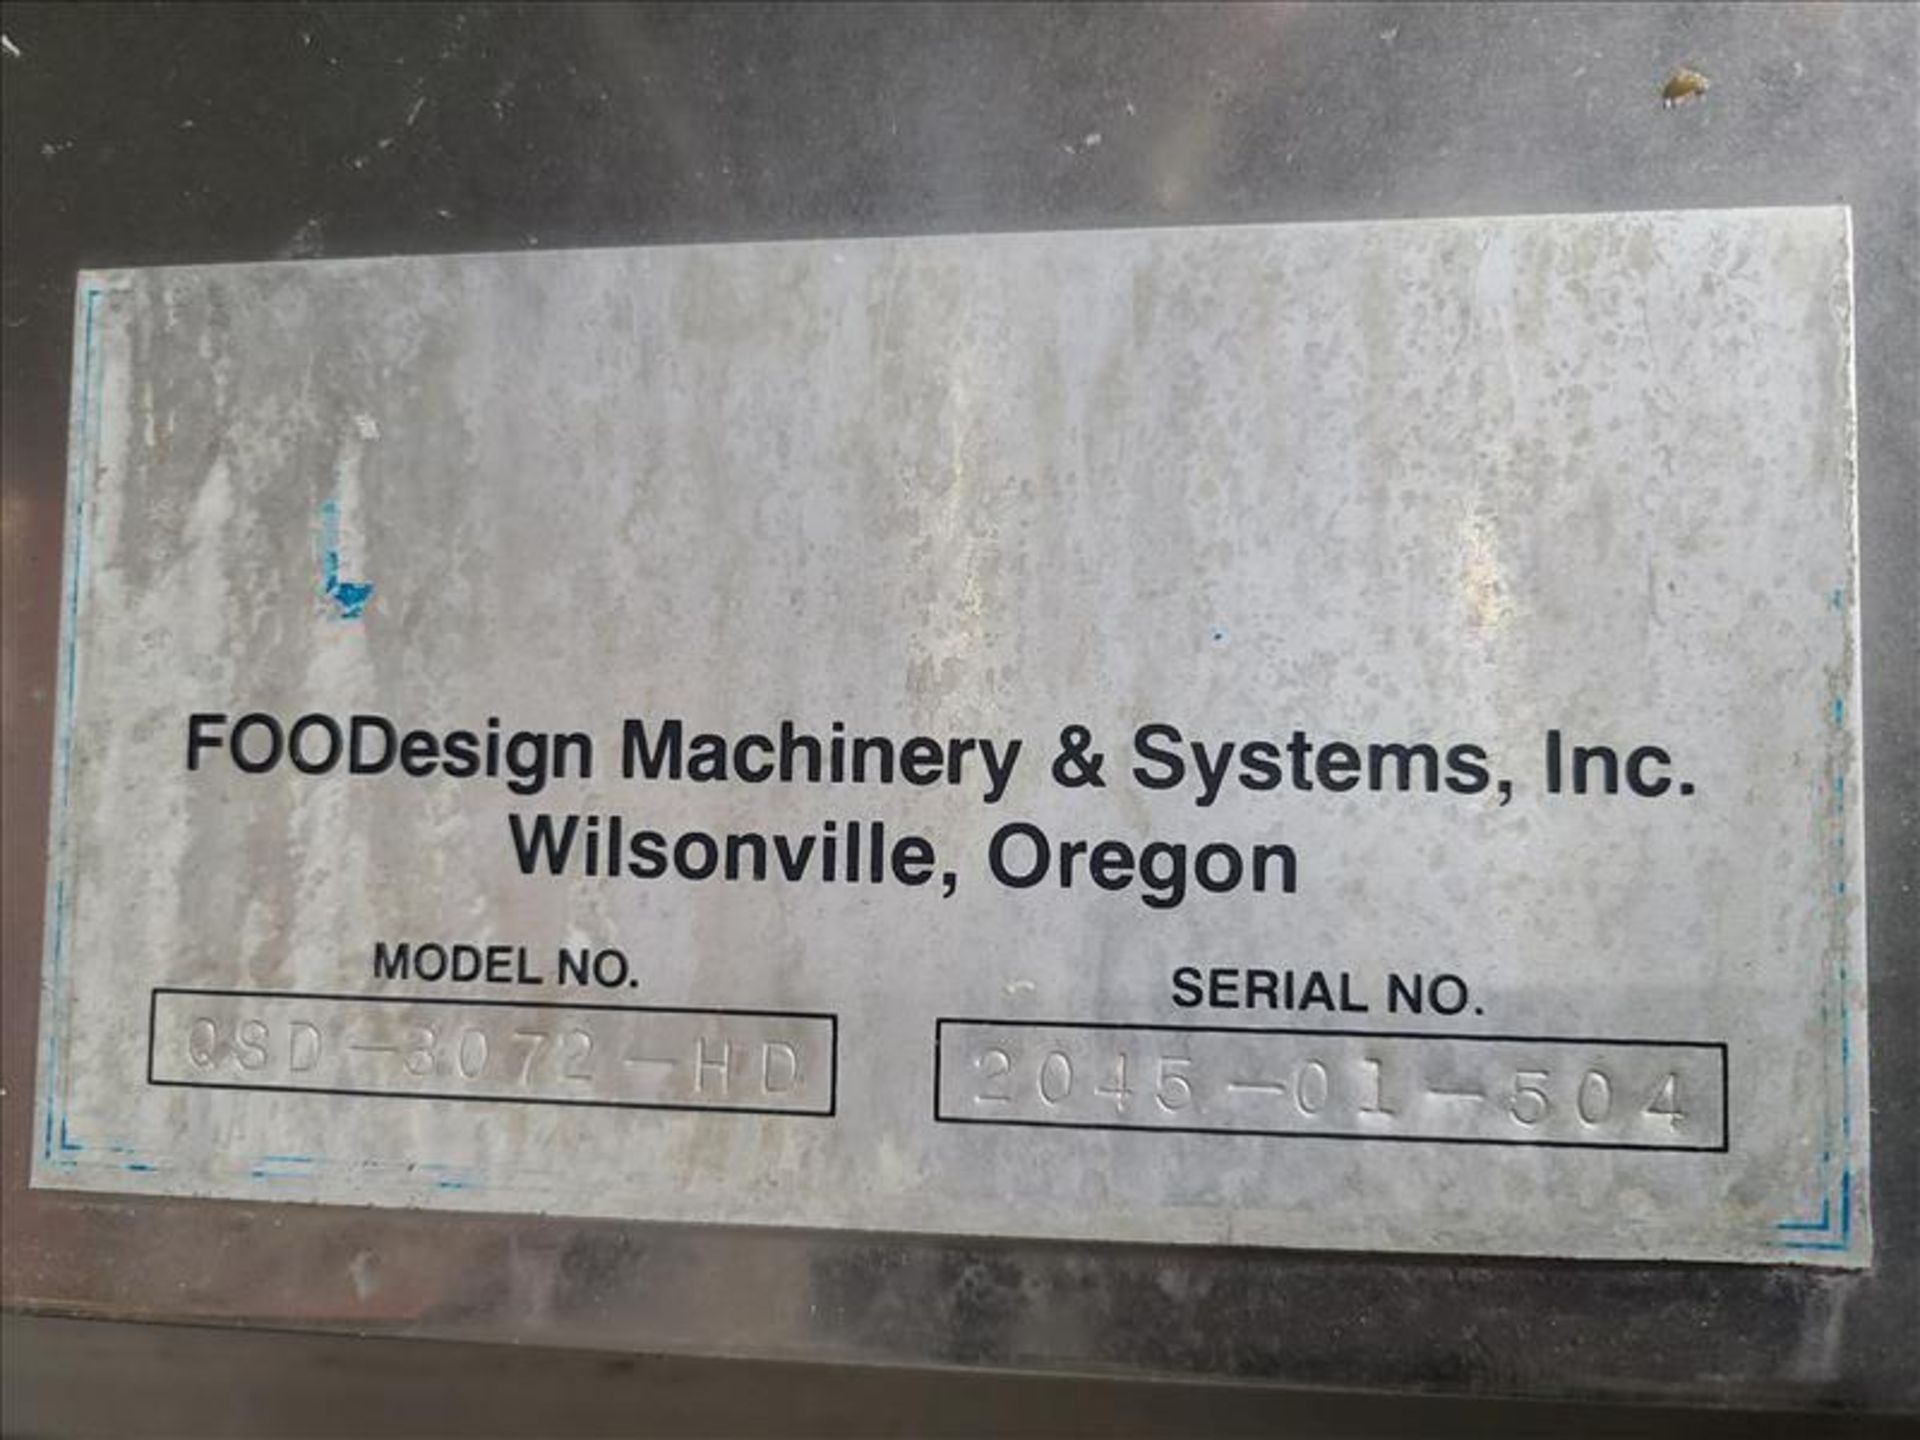 FOODesign Machinery and Systems Quik-Coat Coating Systems Seasoning Drum, mod. QSD-3072-HD, ser. no. - Image 7 of 11